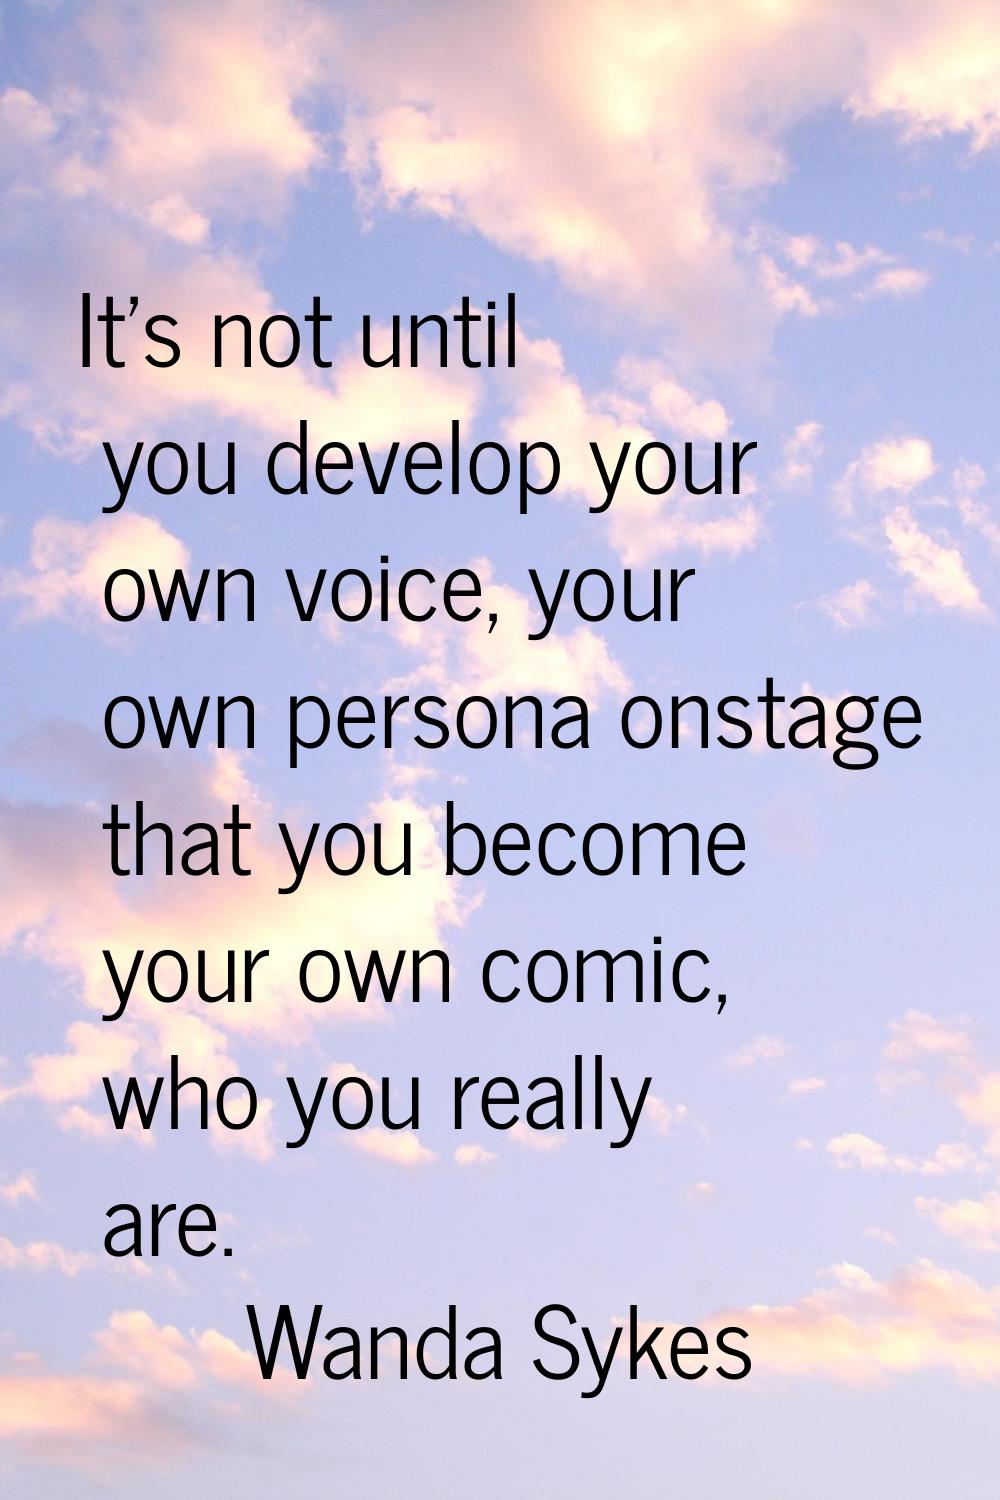 It's not until you develop your own voice, your own persona onstage that you become your own comic,